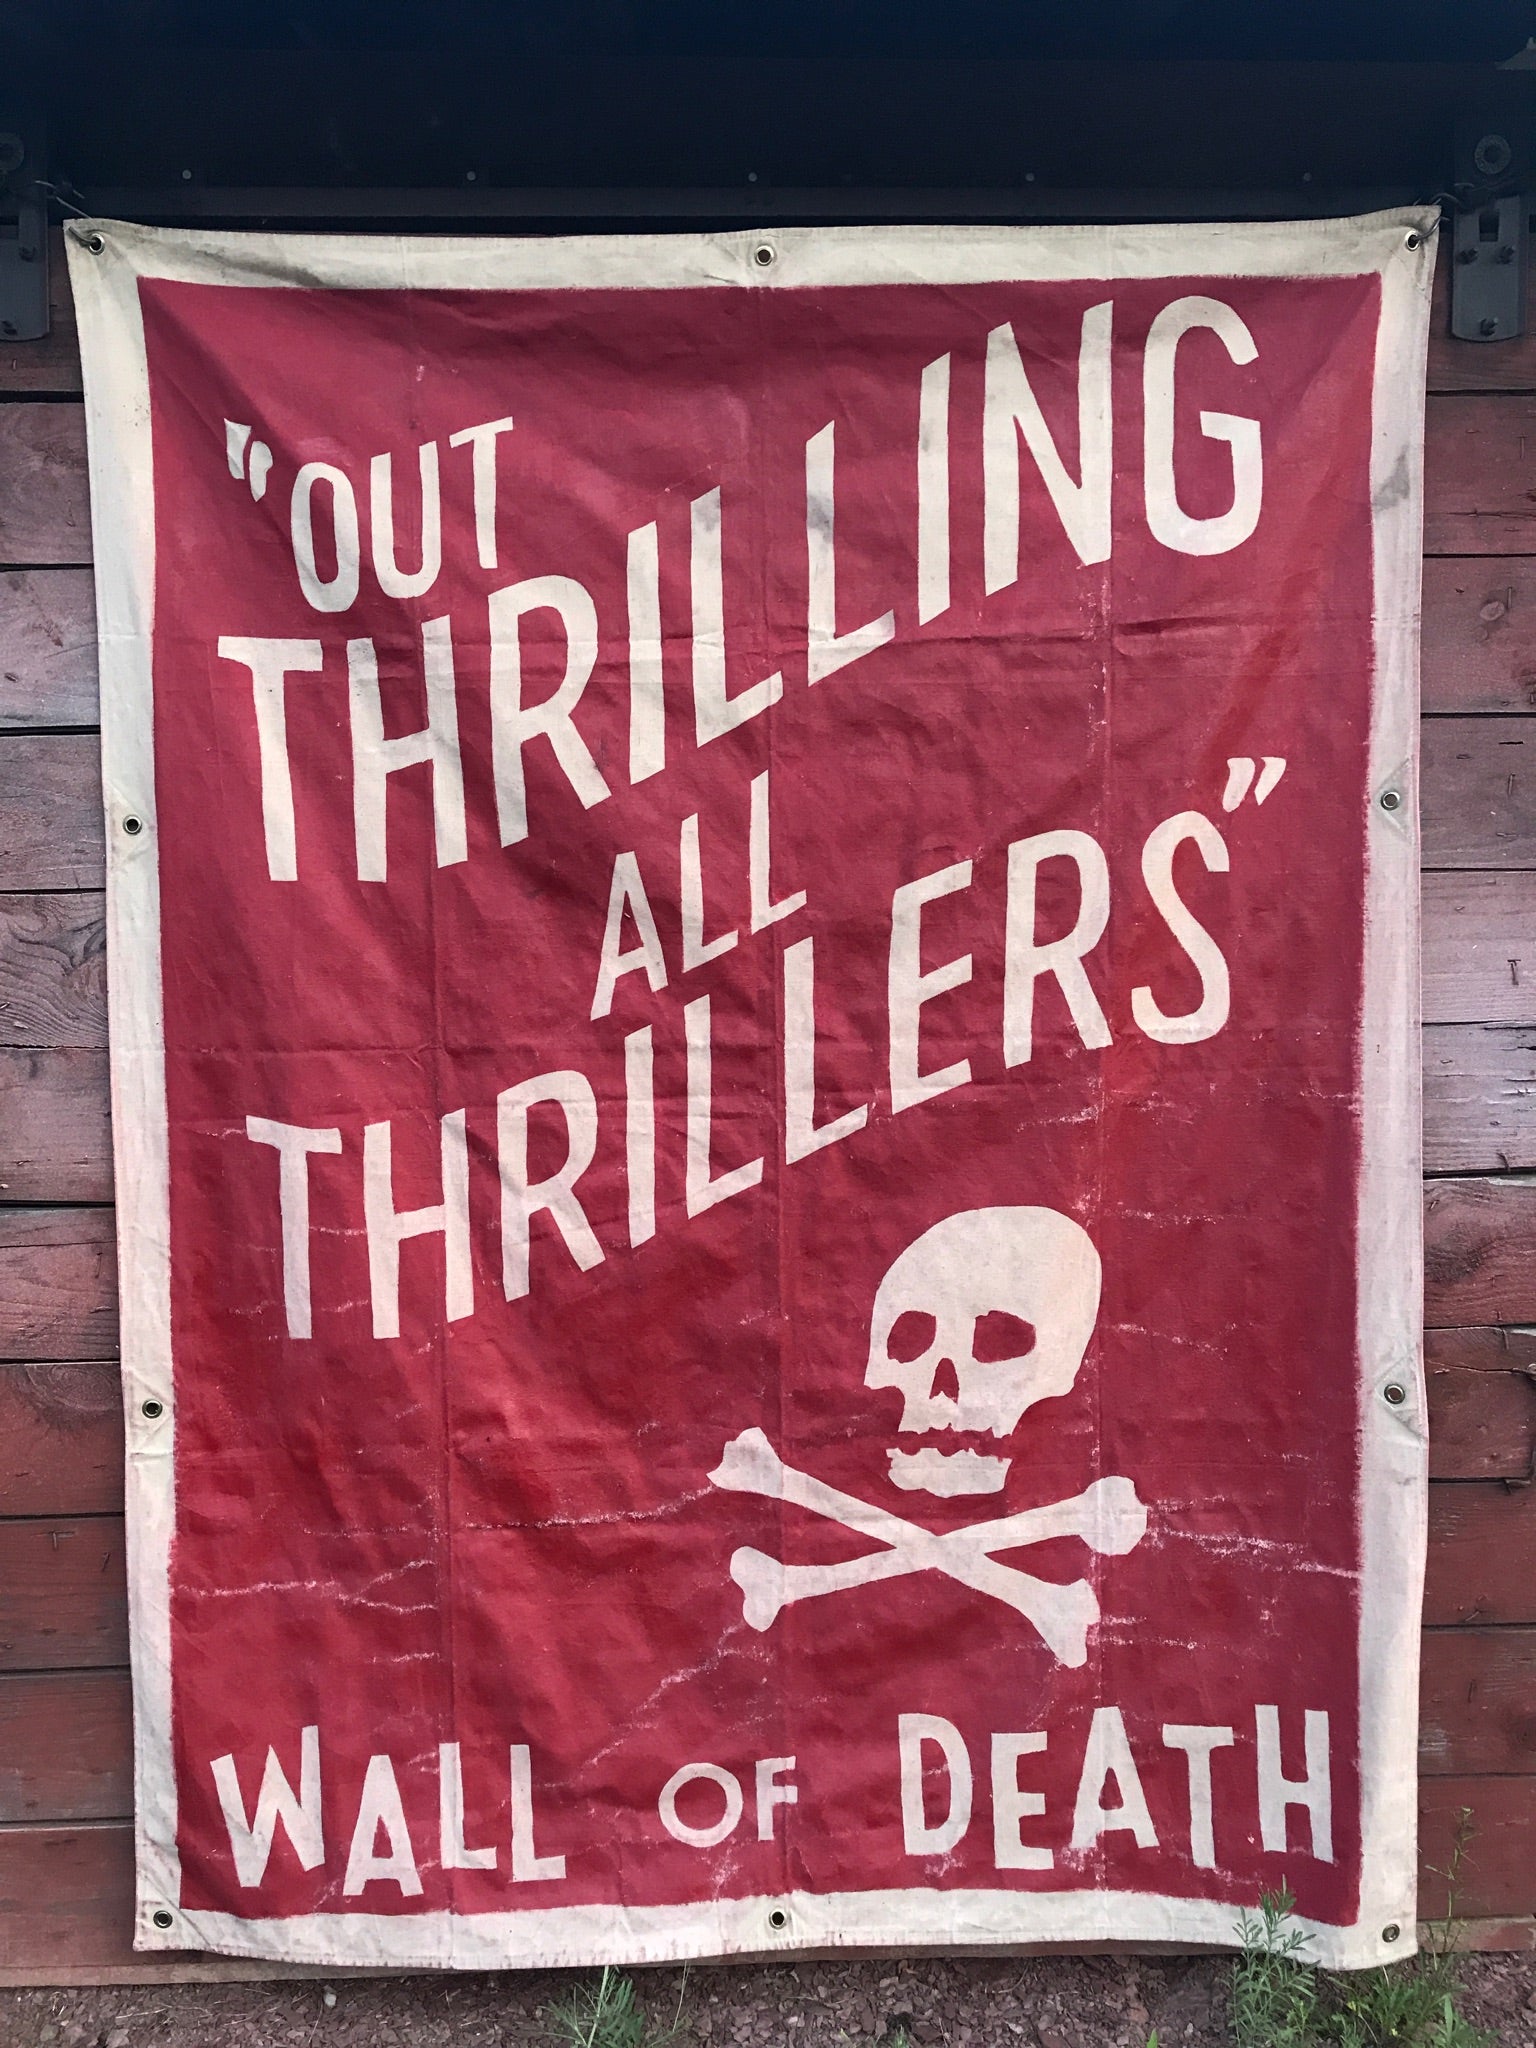 'Out Thrilling All Thrillers' hand painted canvas banner